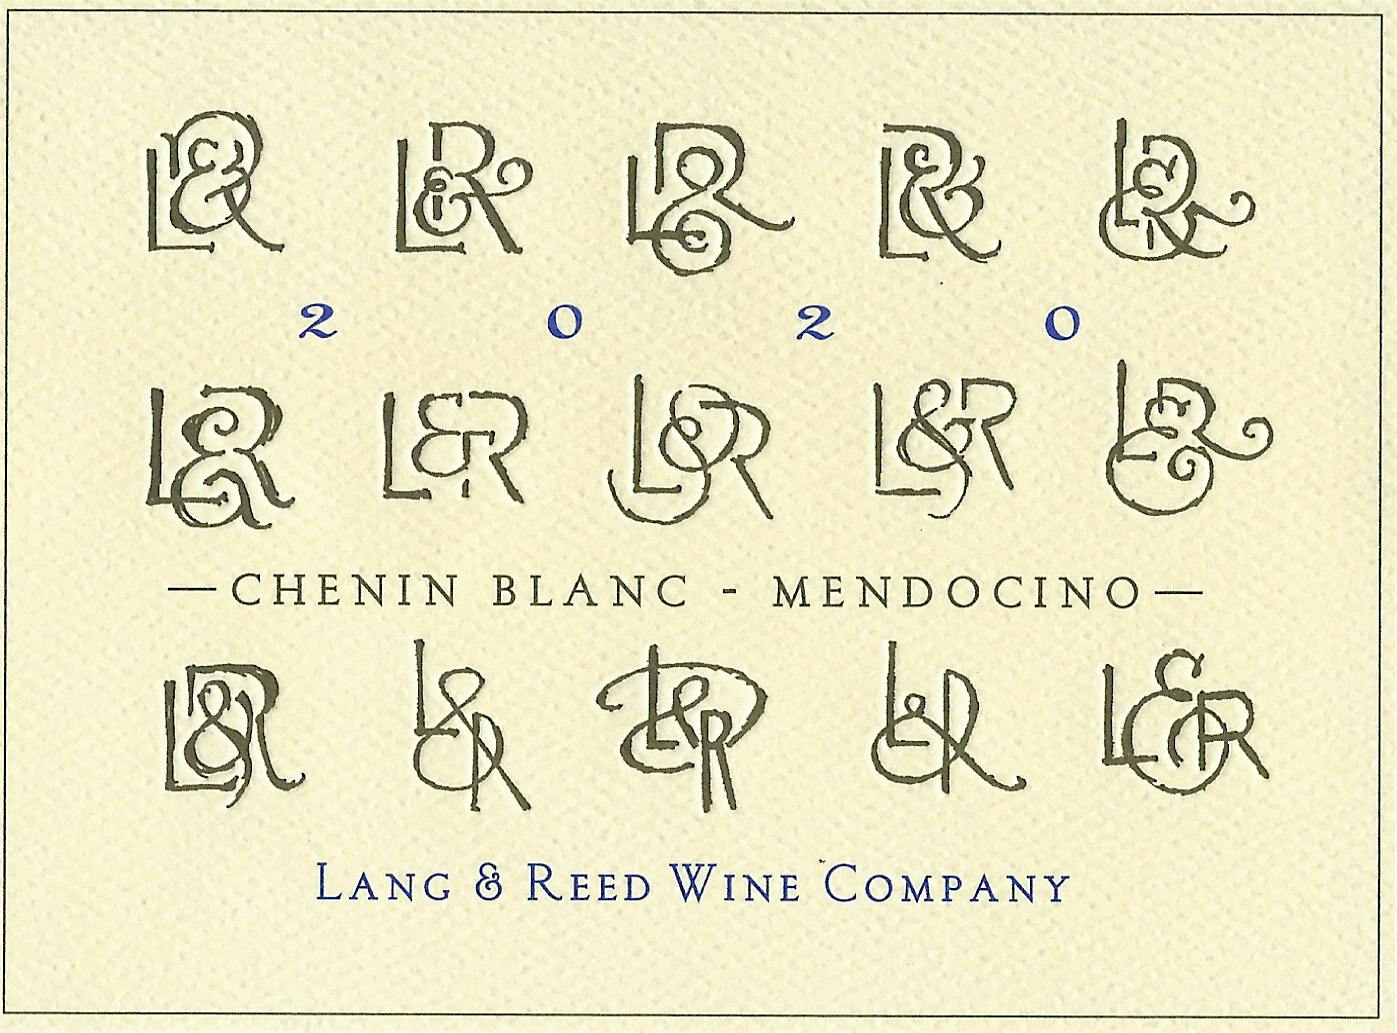 Label for Lang & Reed